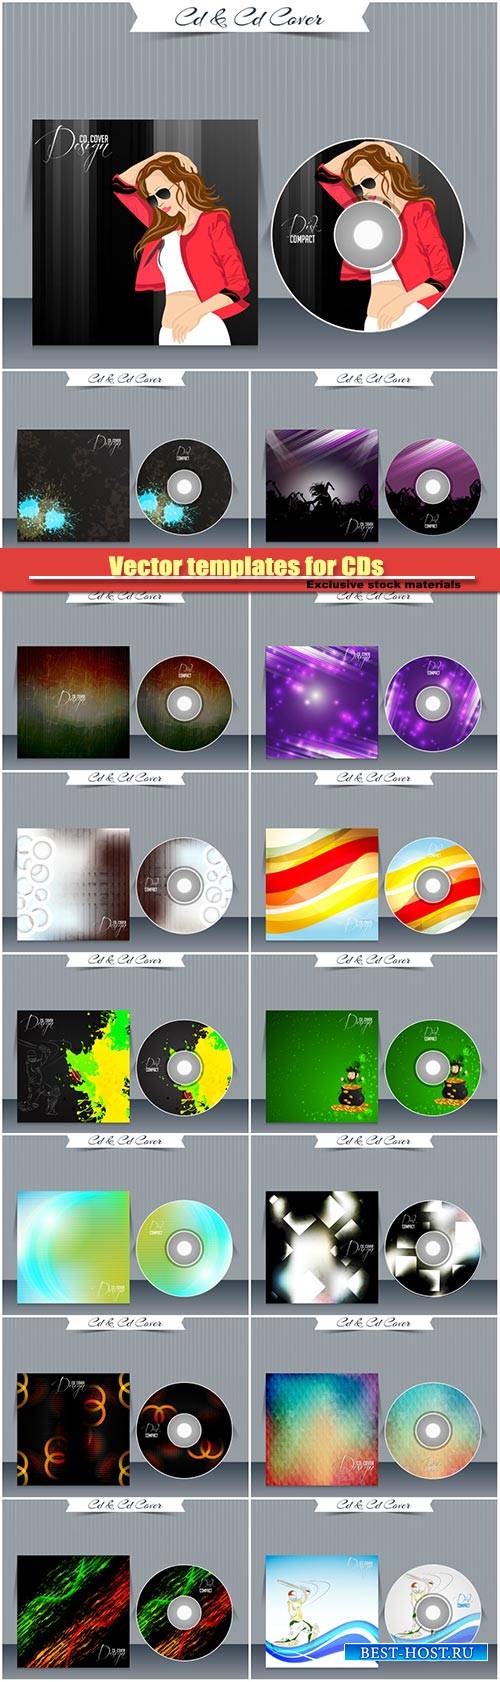 Vector templates for CDs